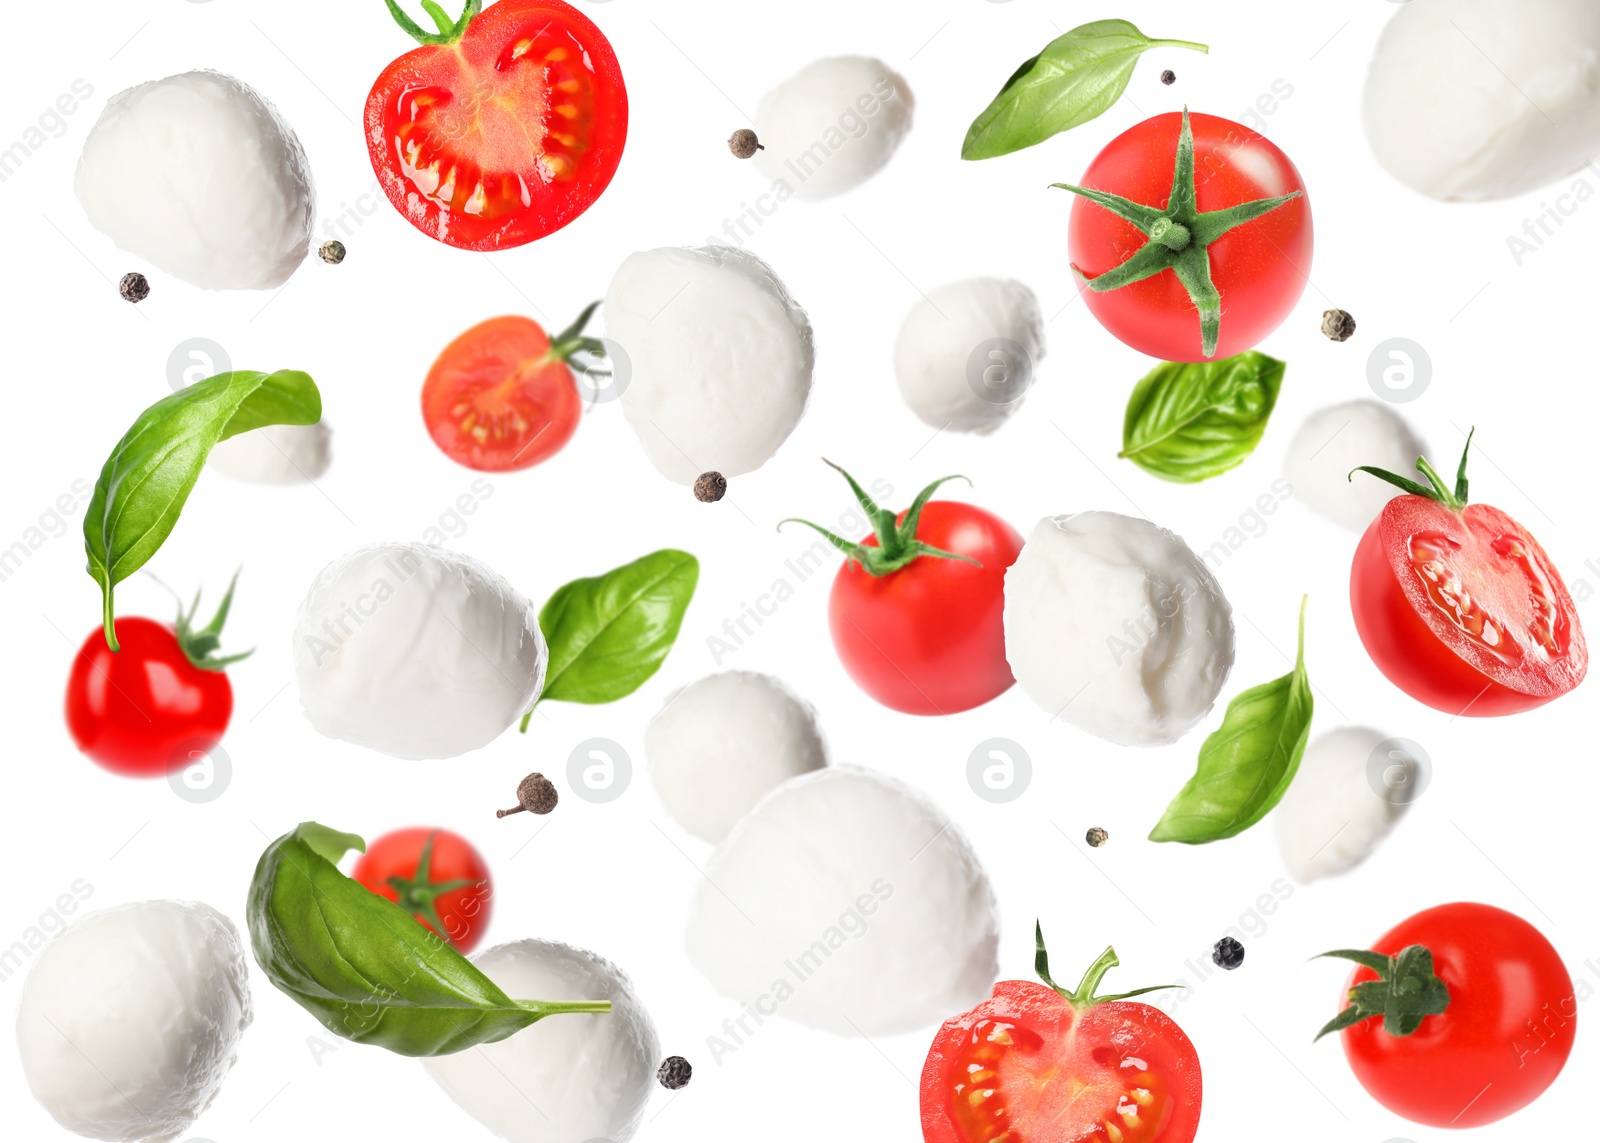 Image of Mozzarella cheese balls, tomatoes, basil leaves and peppercorns for caprese salad flying on white background